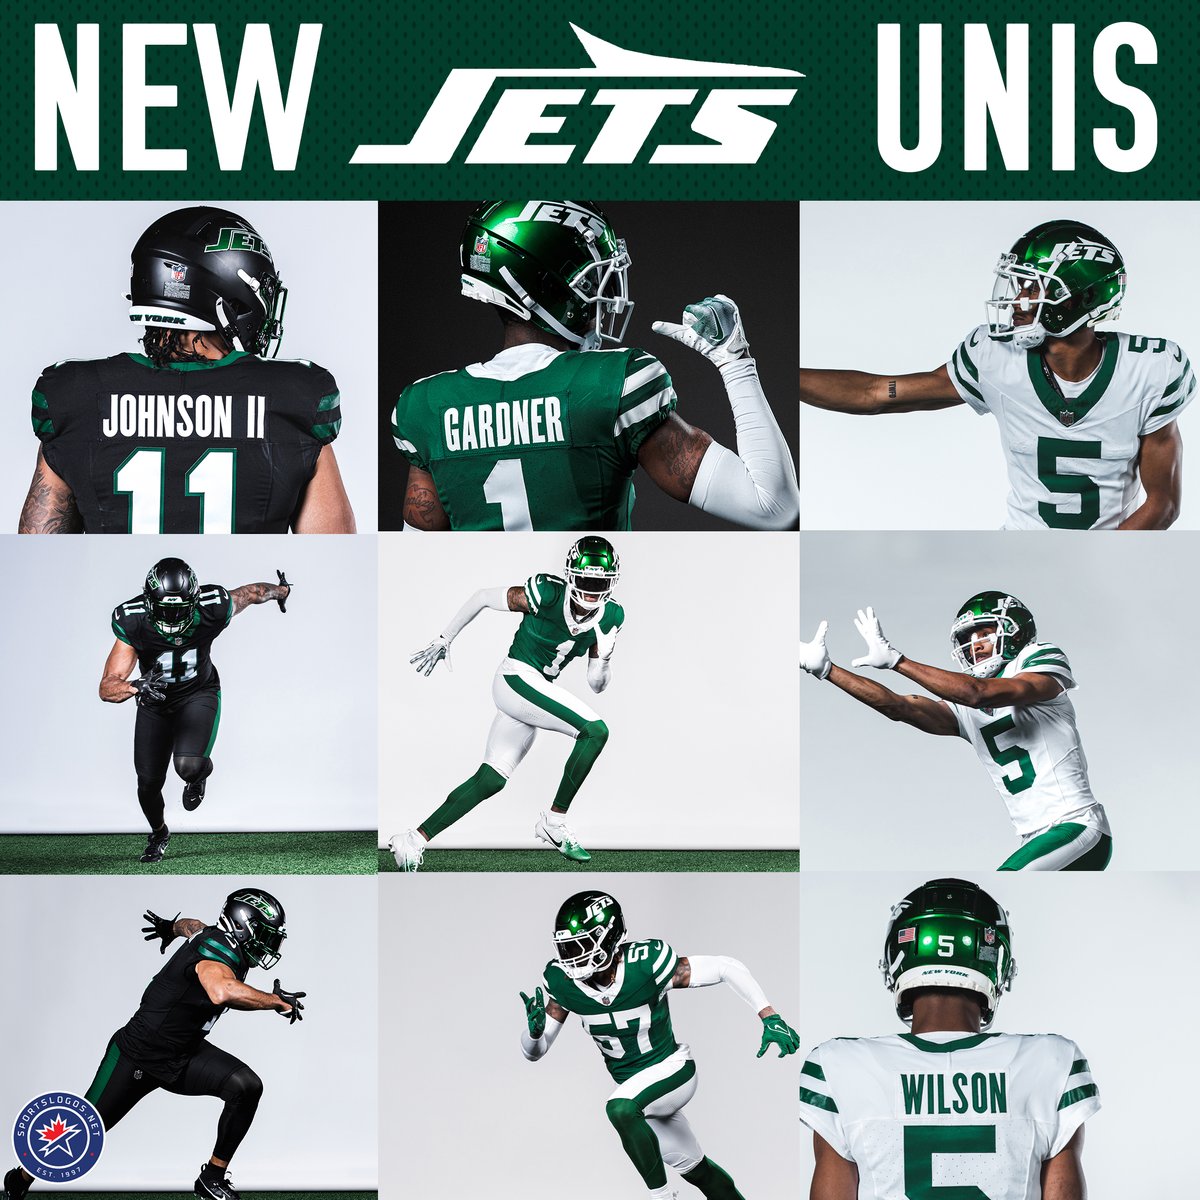 “We work for the fans ... They have consistently asked for us to return to our roots and we heard them.' - New York Jets Chairman Woody Johnson #TakeFlight #NYJ #NFL #NYJets Our New York Jets new uniform and logo story here: news.sportslogos.net/2024/04/15/new…